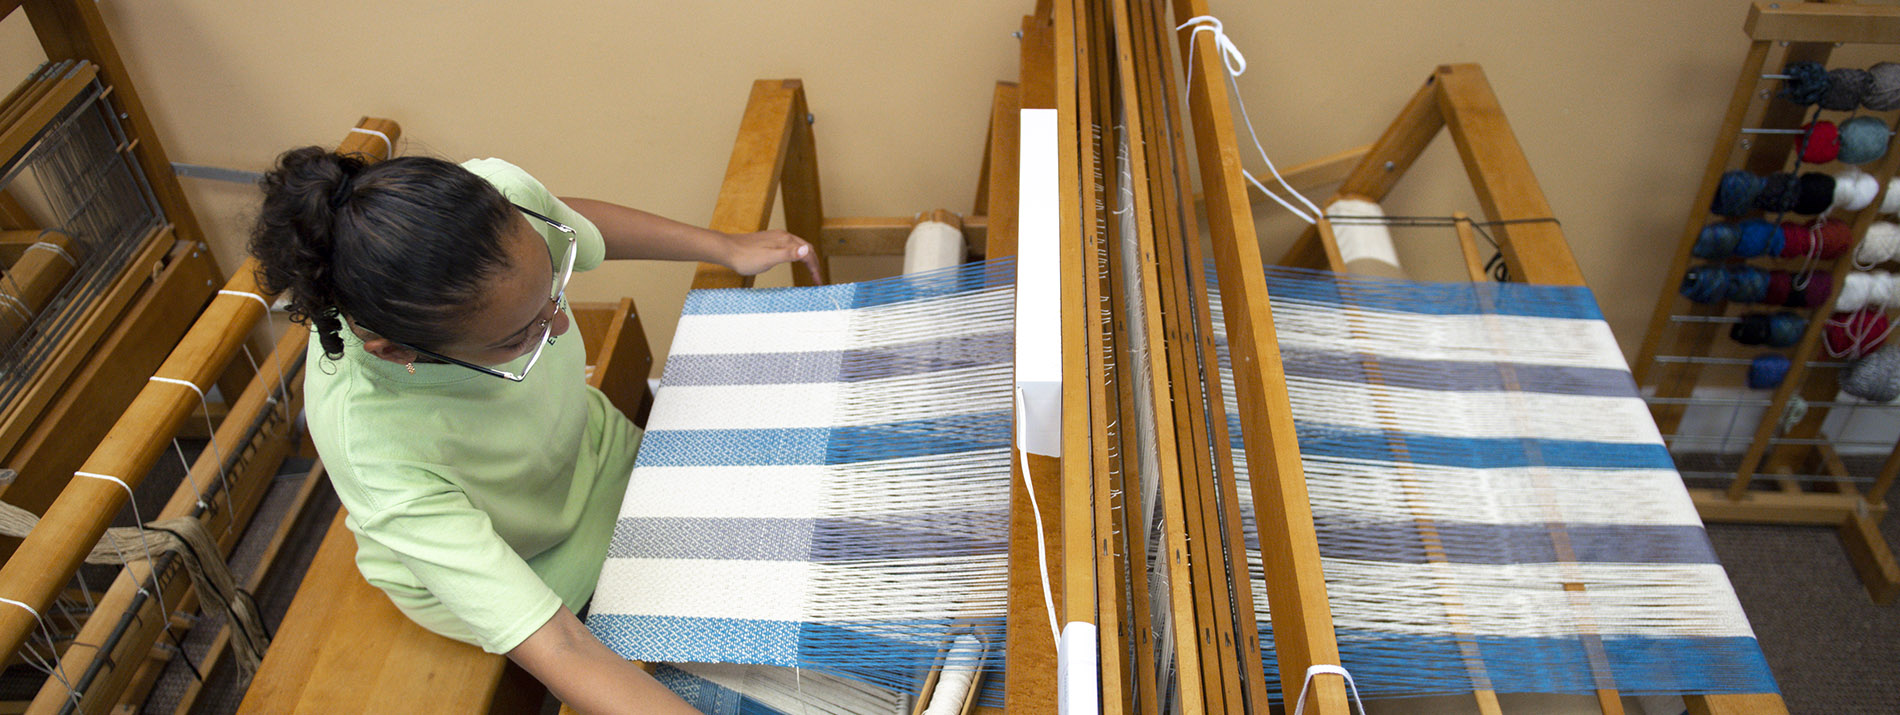 female student sitting at a loom